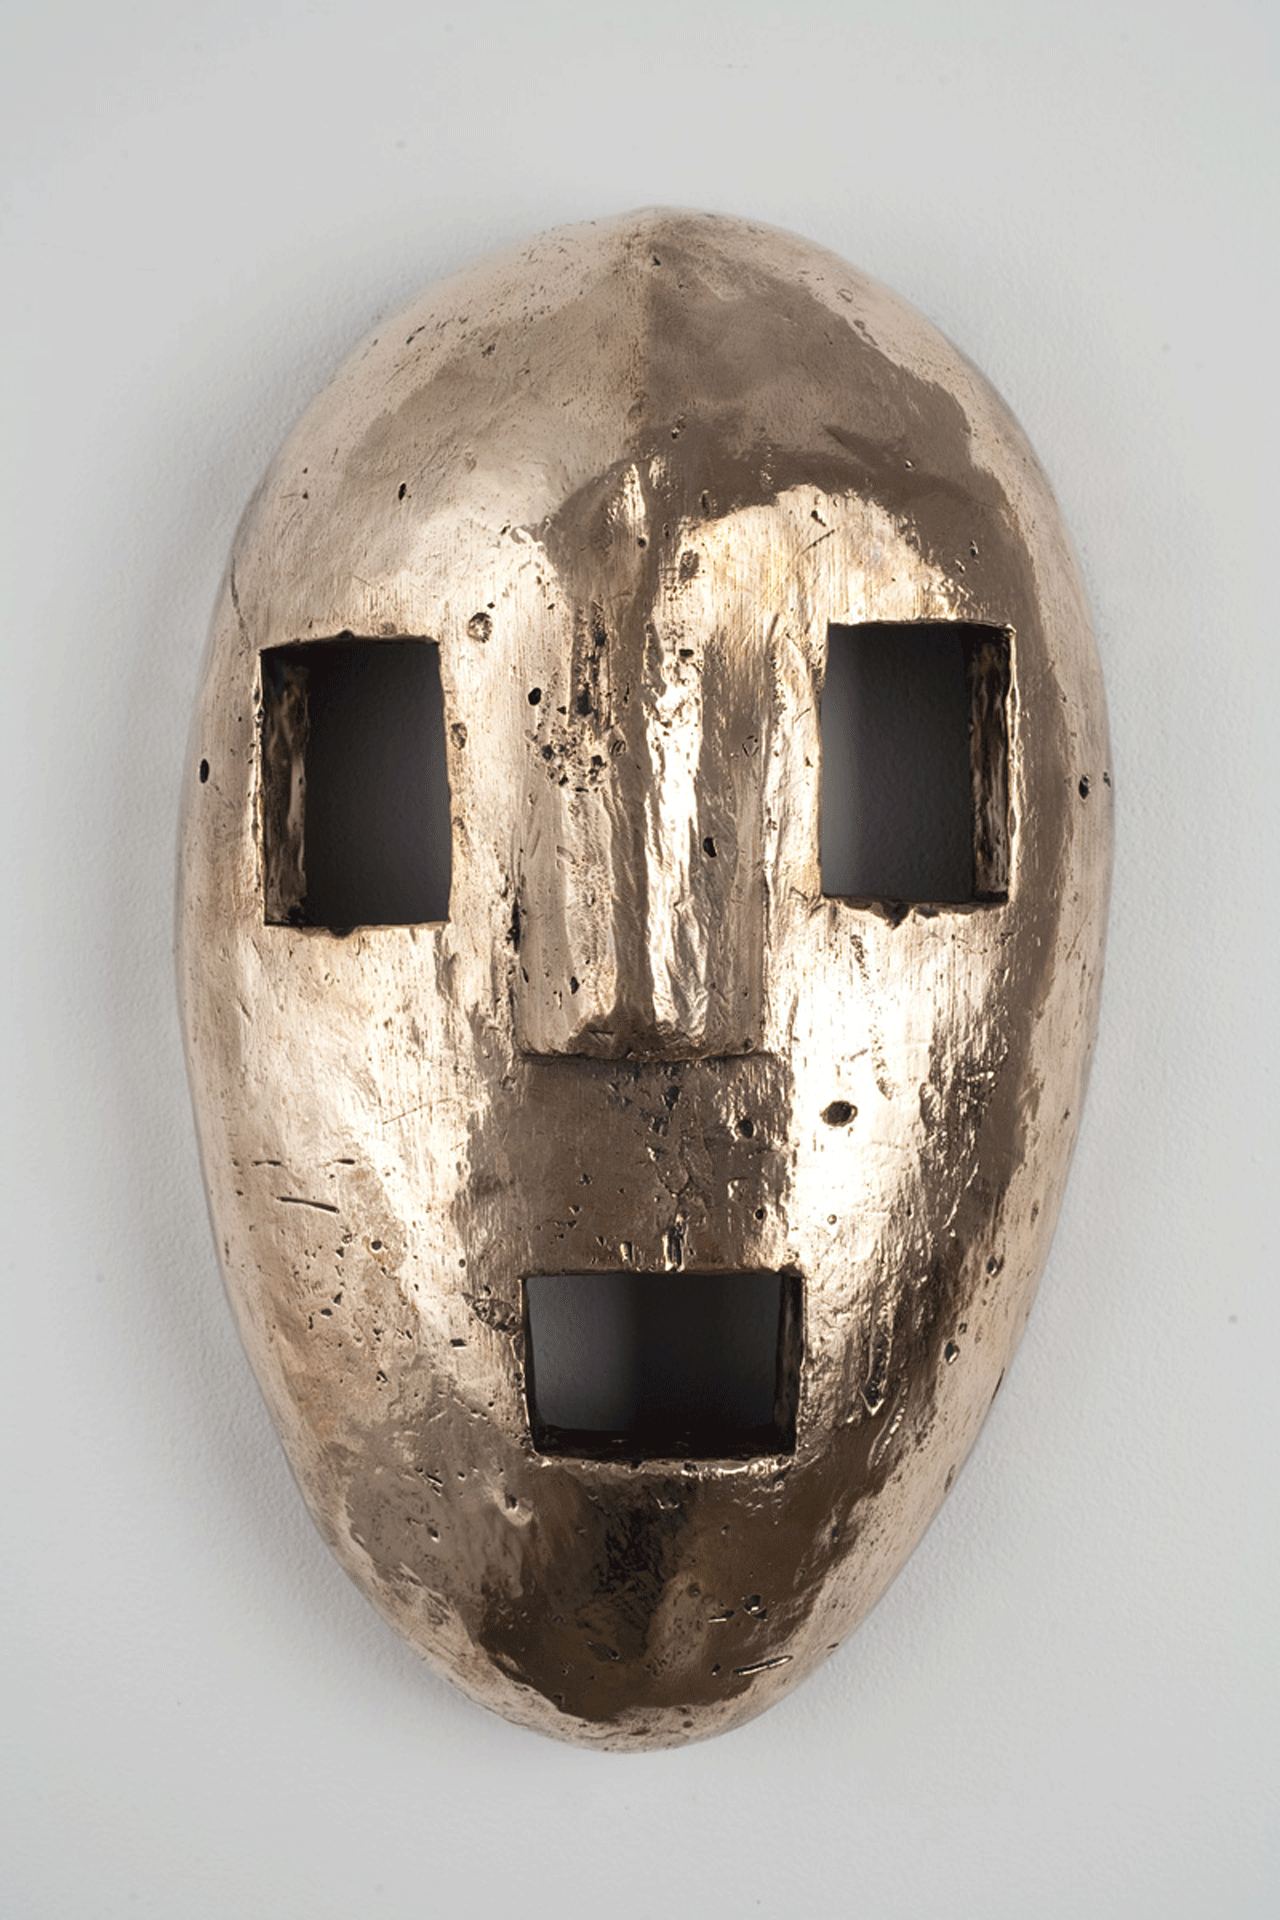 A sculpture by Sherrie Levine, titled, Lega Mask, dated 2010.